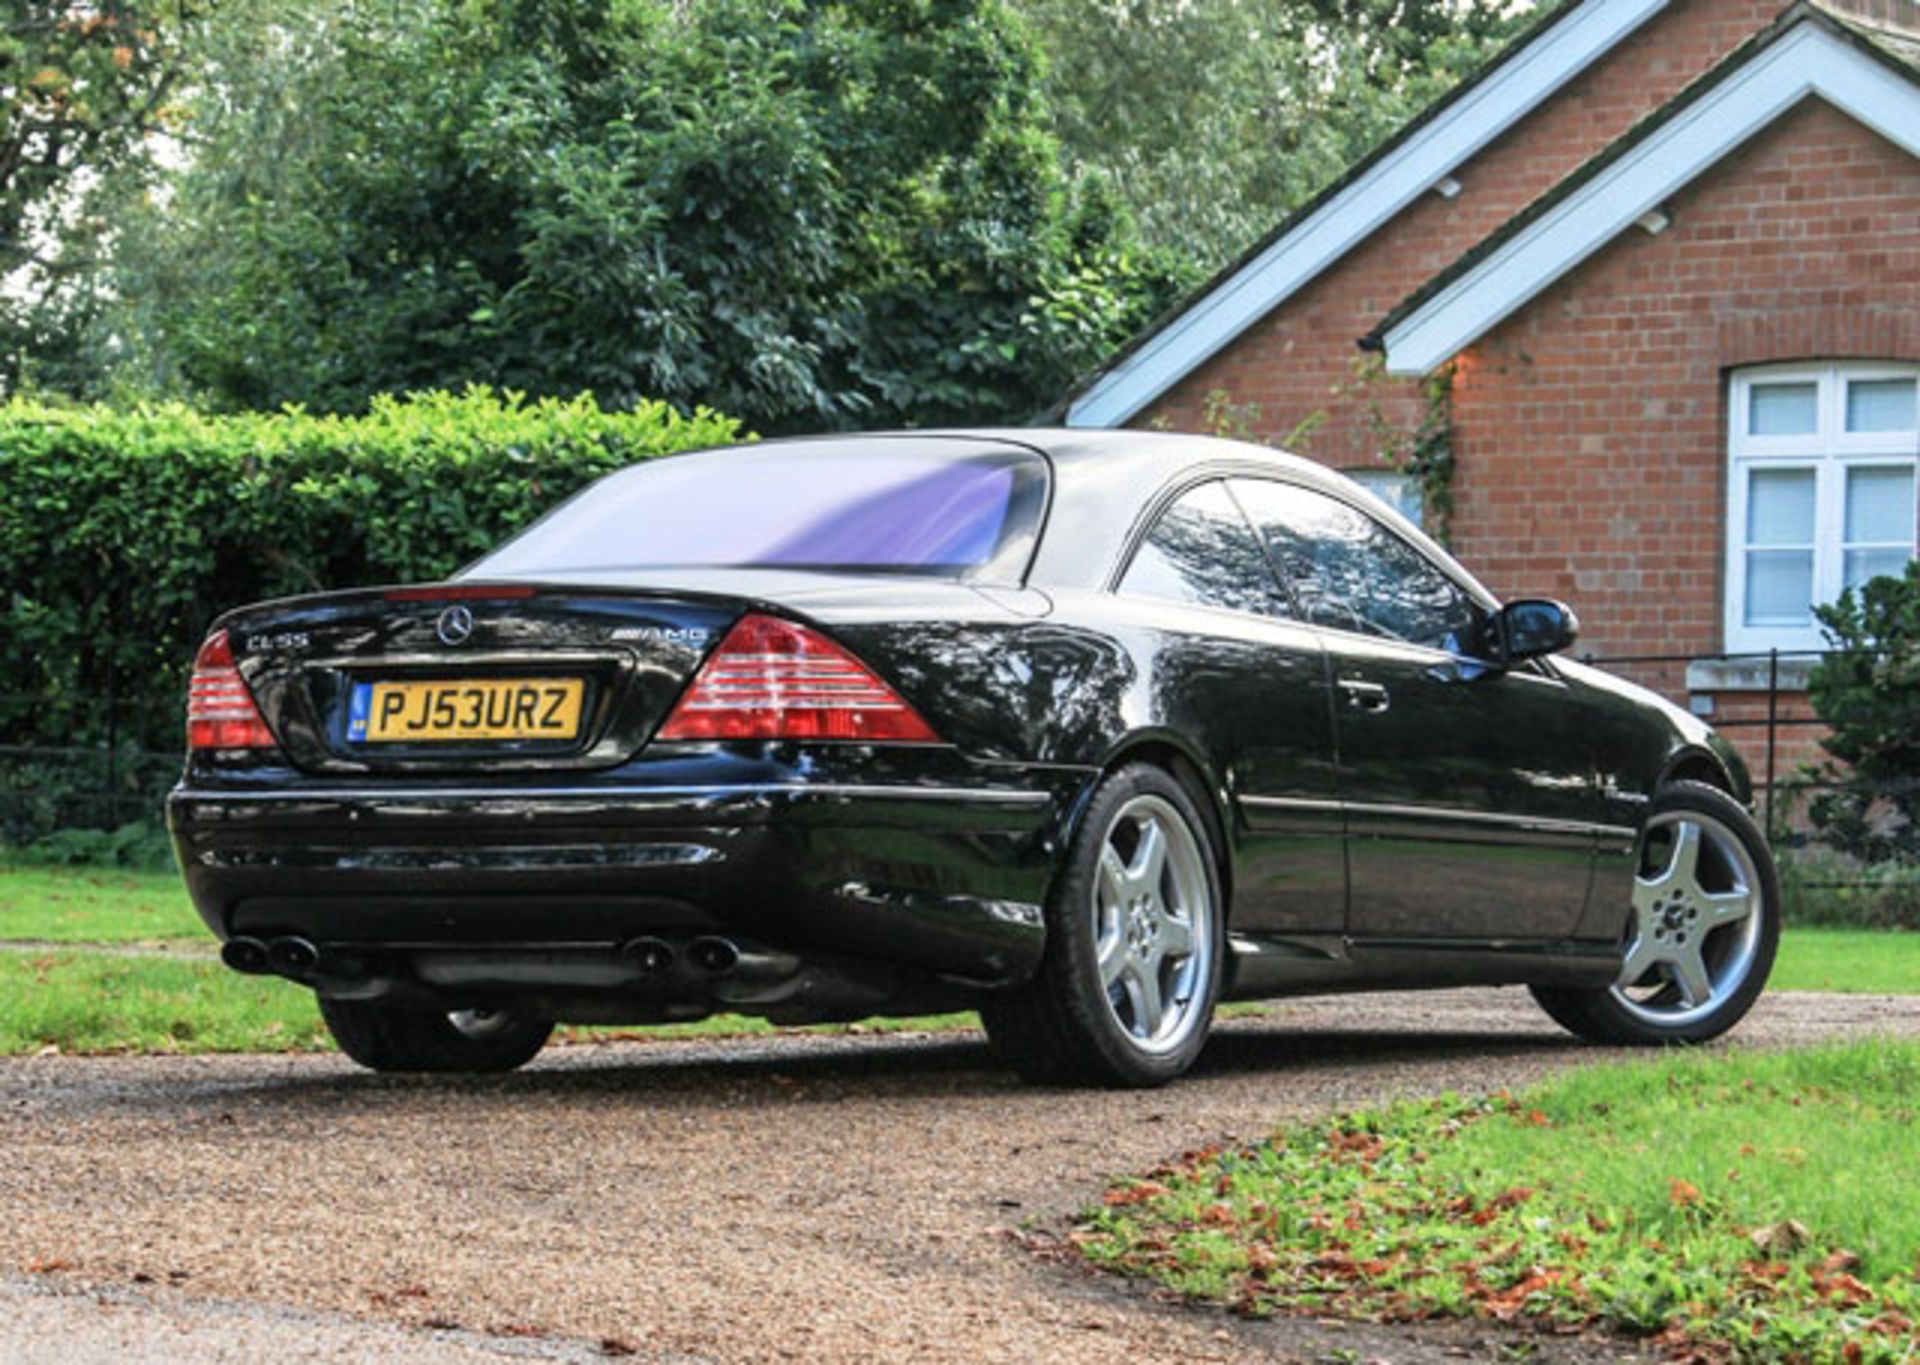 2003 Mercedes-Benz CL 55 AMG - Image 3 of 5